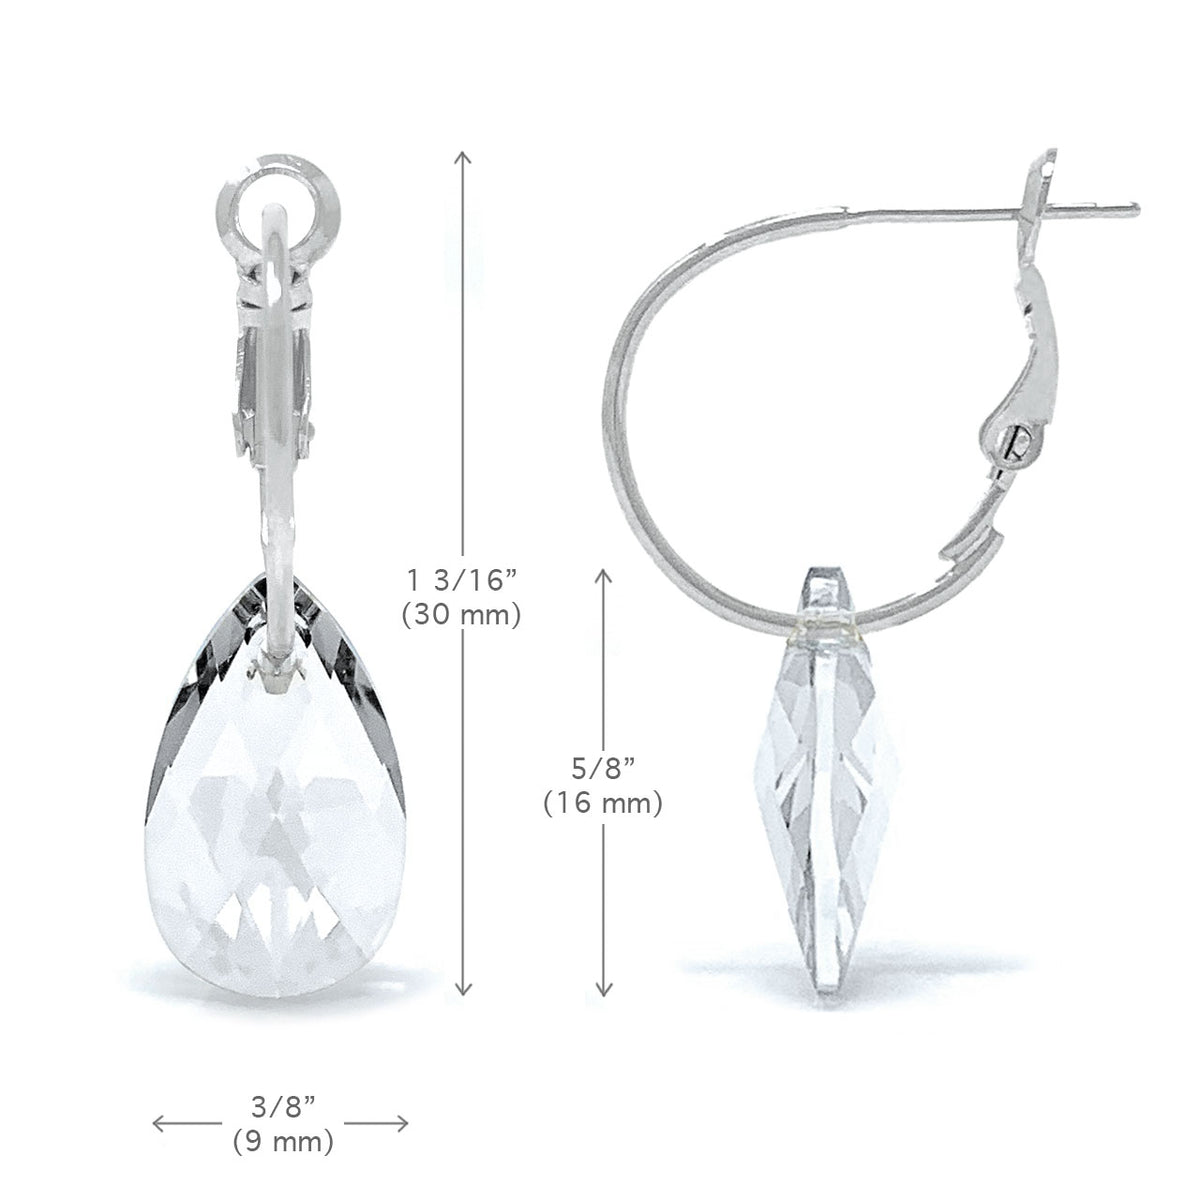 Aurora Small Drop Earrings with White Clear Pear Crystals from Swarovski Silver Toned Rhodium Plated - Ed Heart